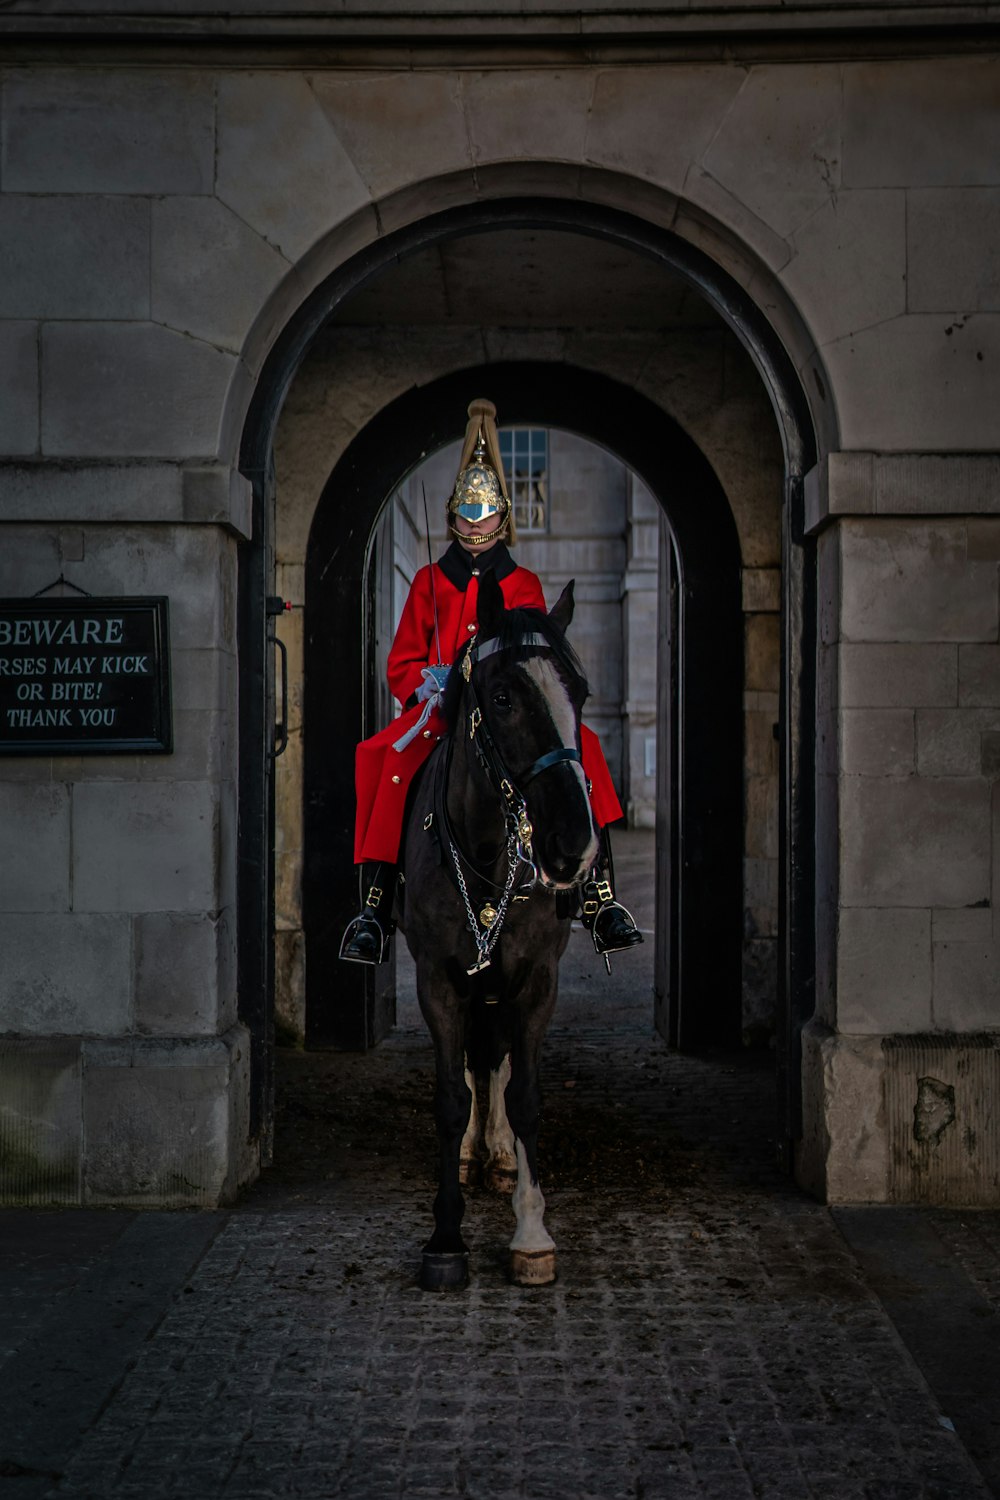 man in red and black coat riding black horse